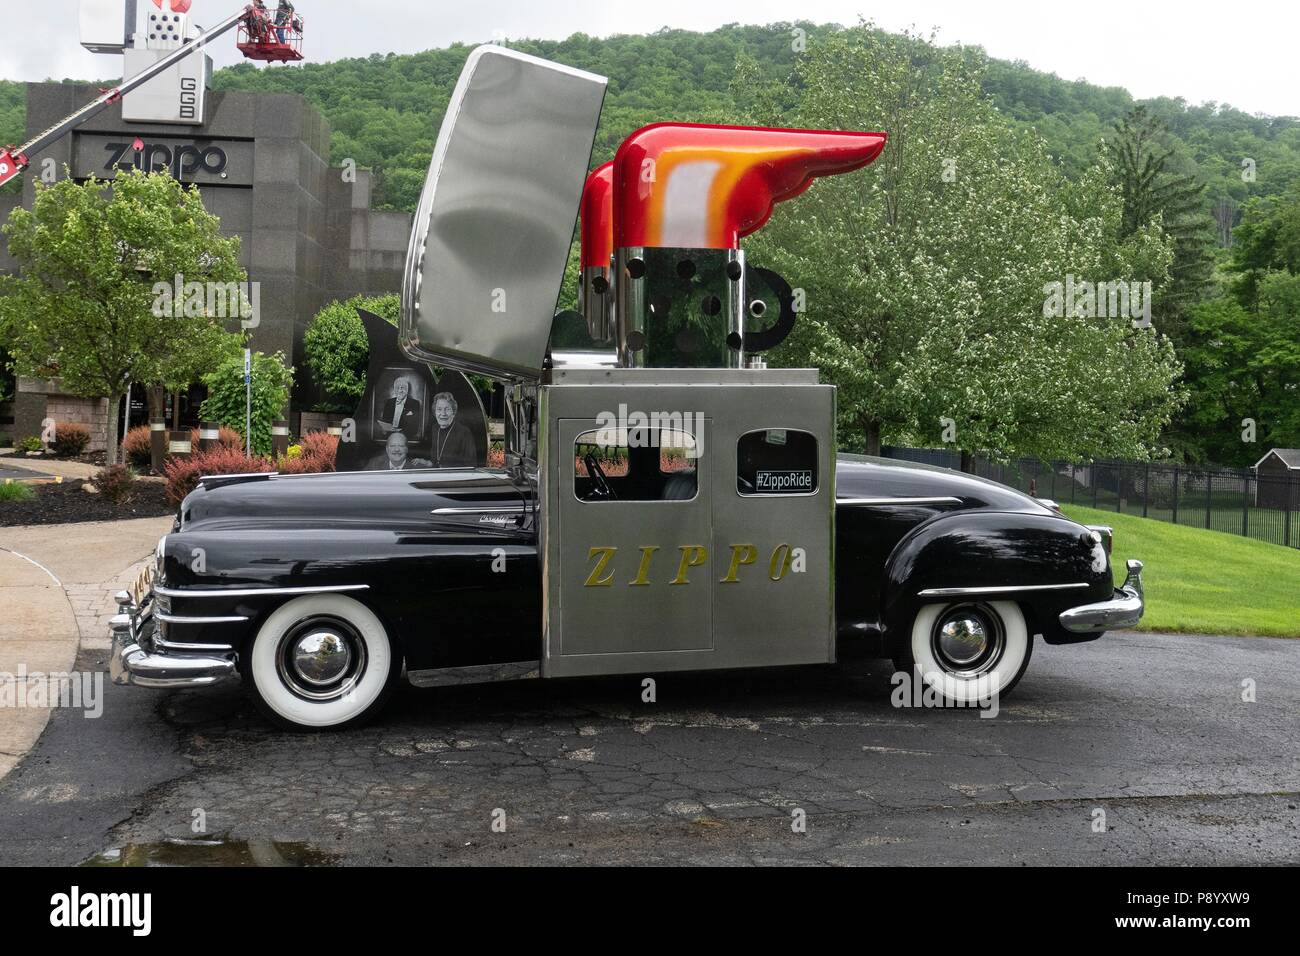 The Zippo car, created from a 1947 Chrysler Saratoga automobile, is photographed in front of zippo Museum in Bradford Pennsylvania. Stock Photo